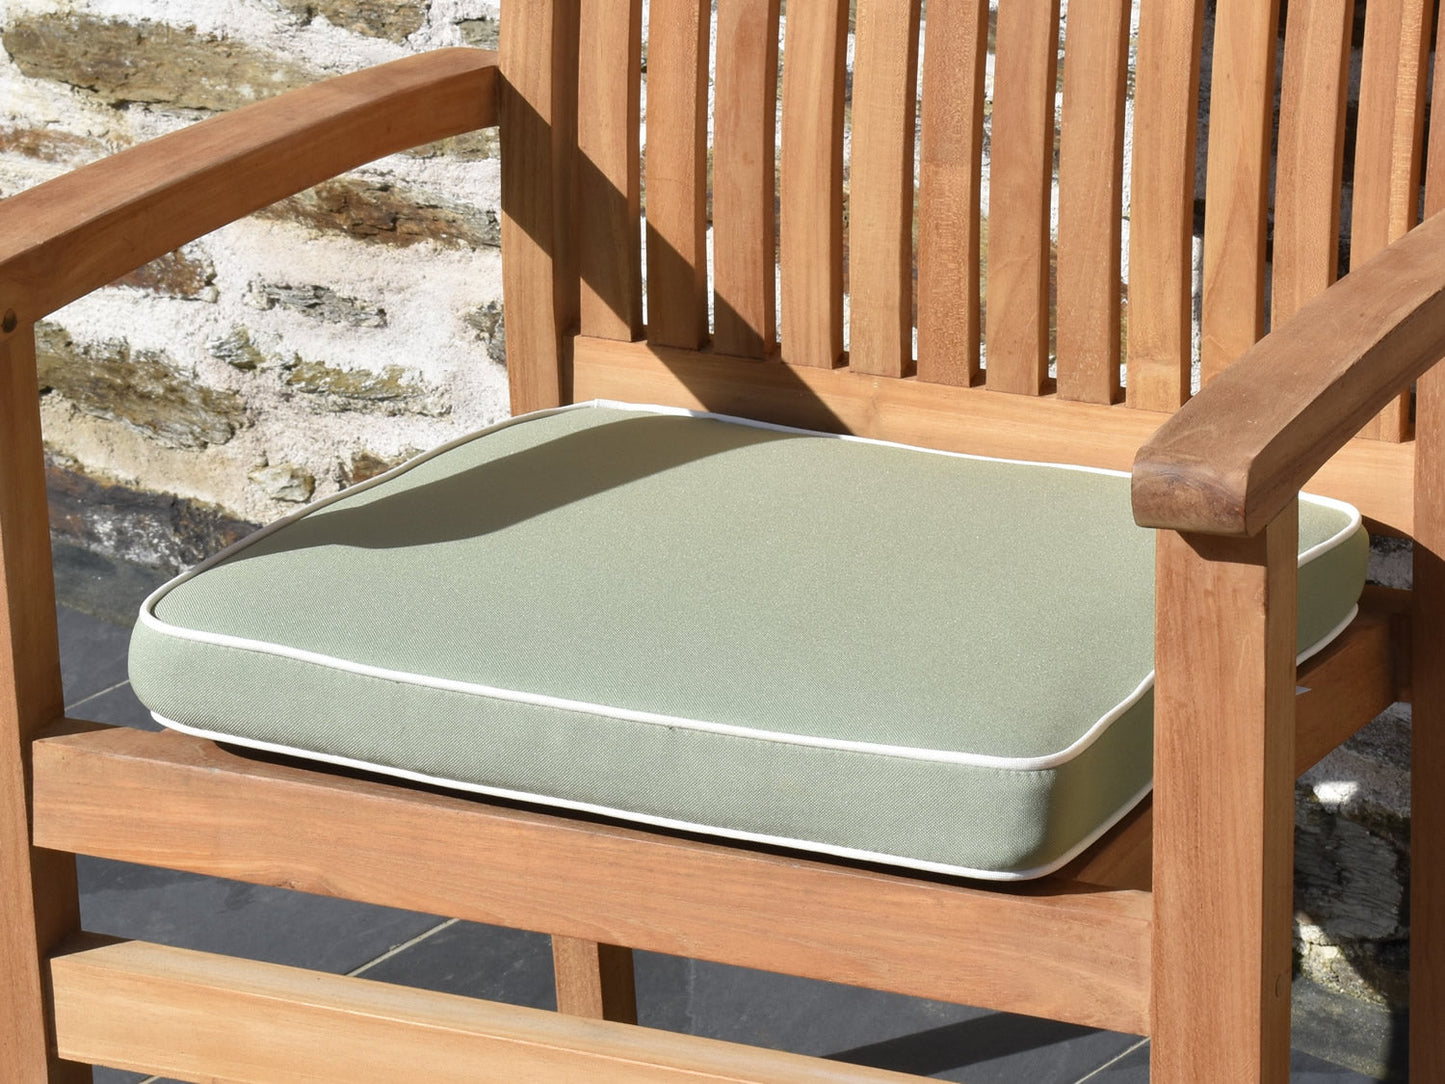 Luxury large outdoor garden seat pad, Light Olive with White piping, close view